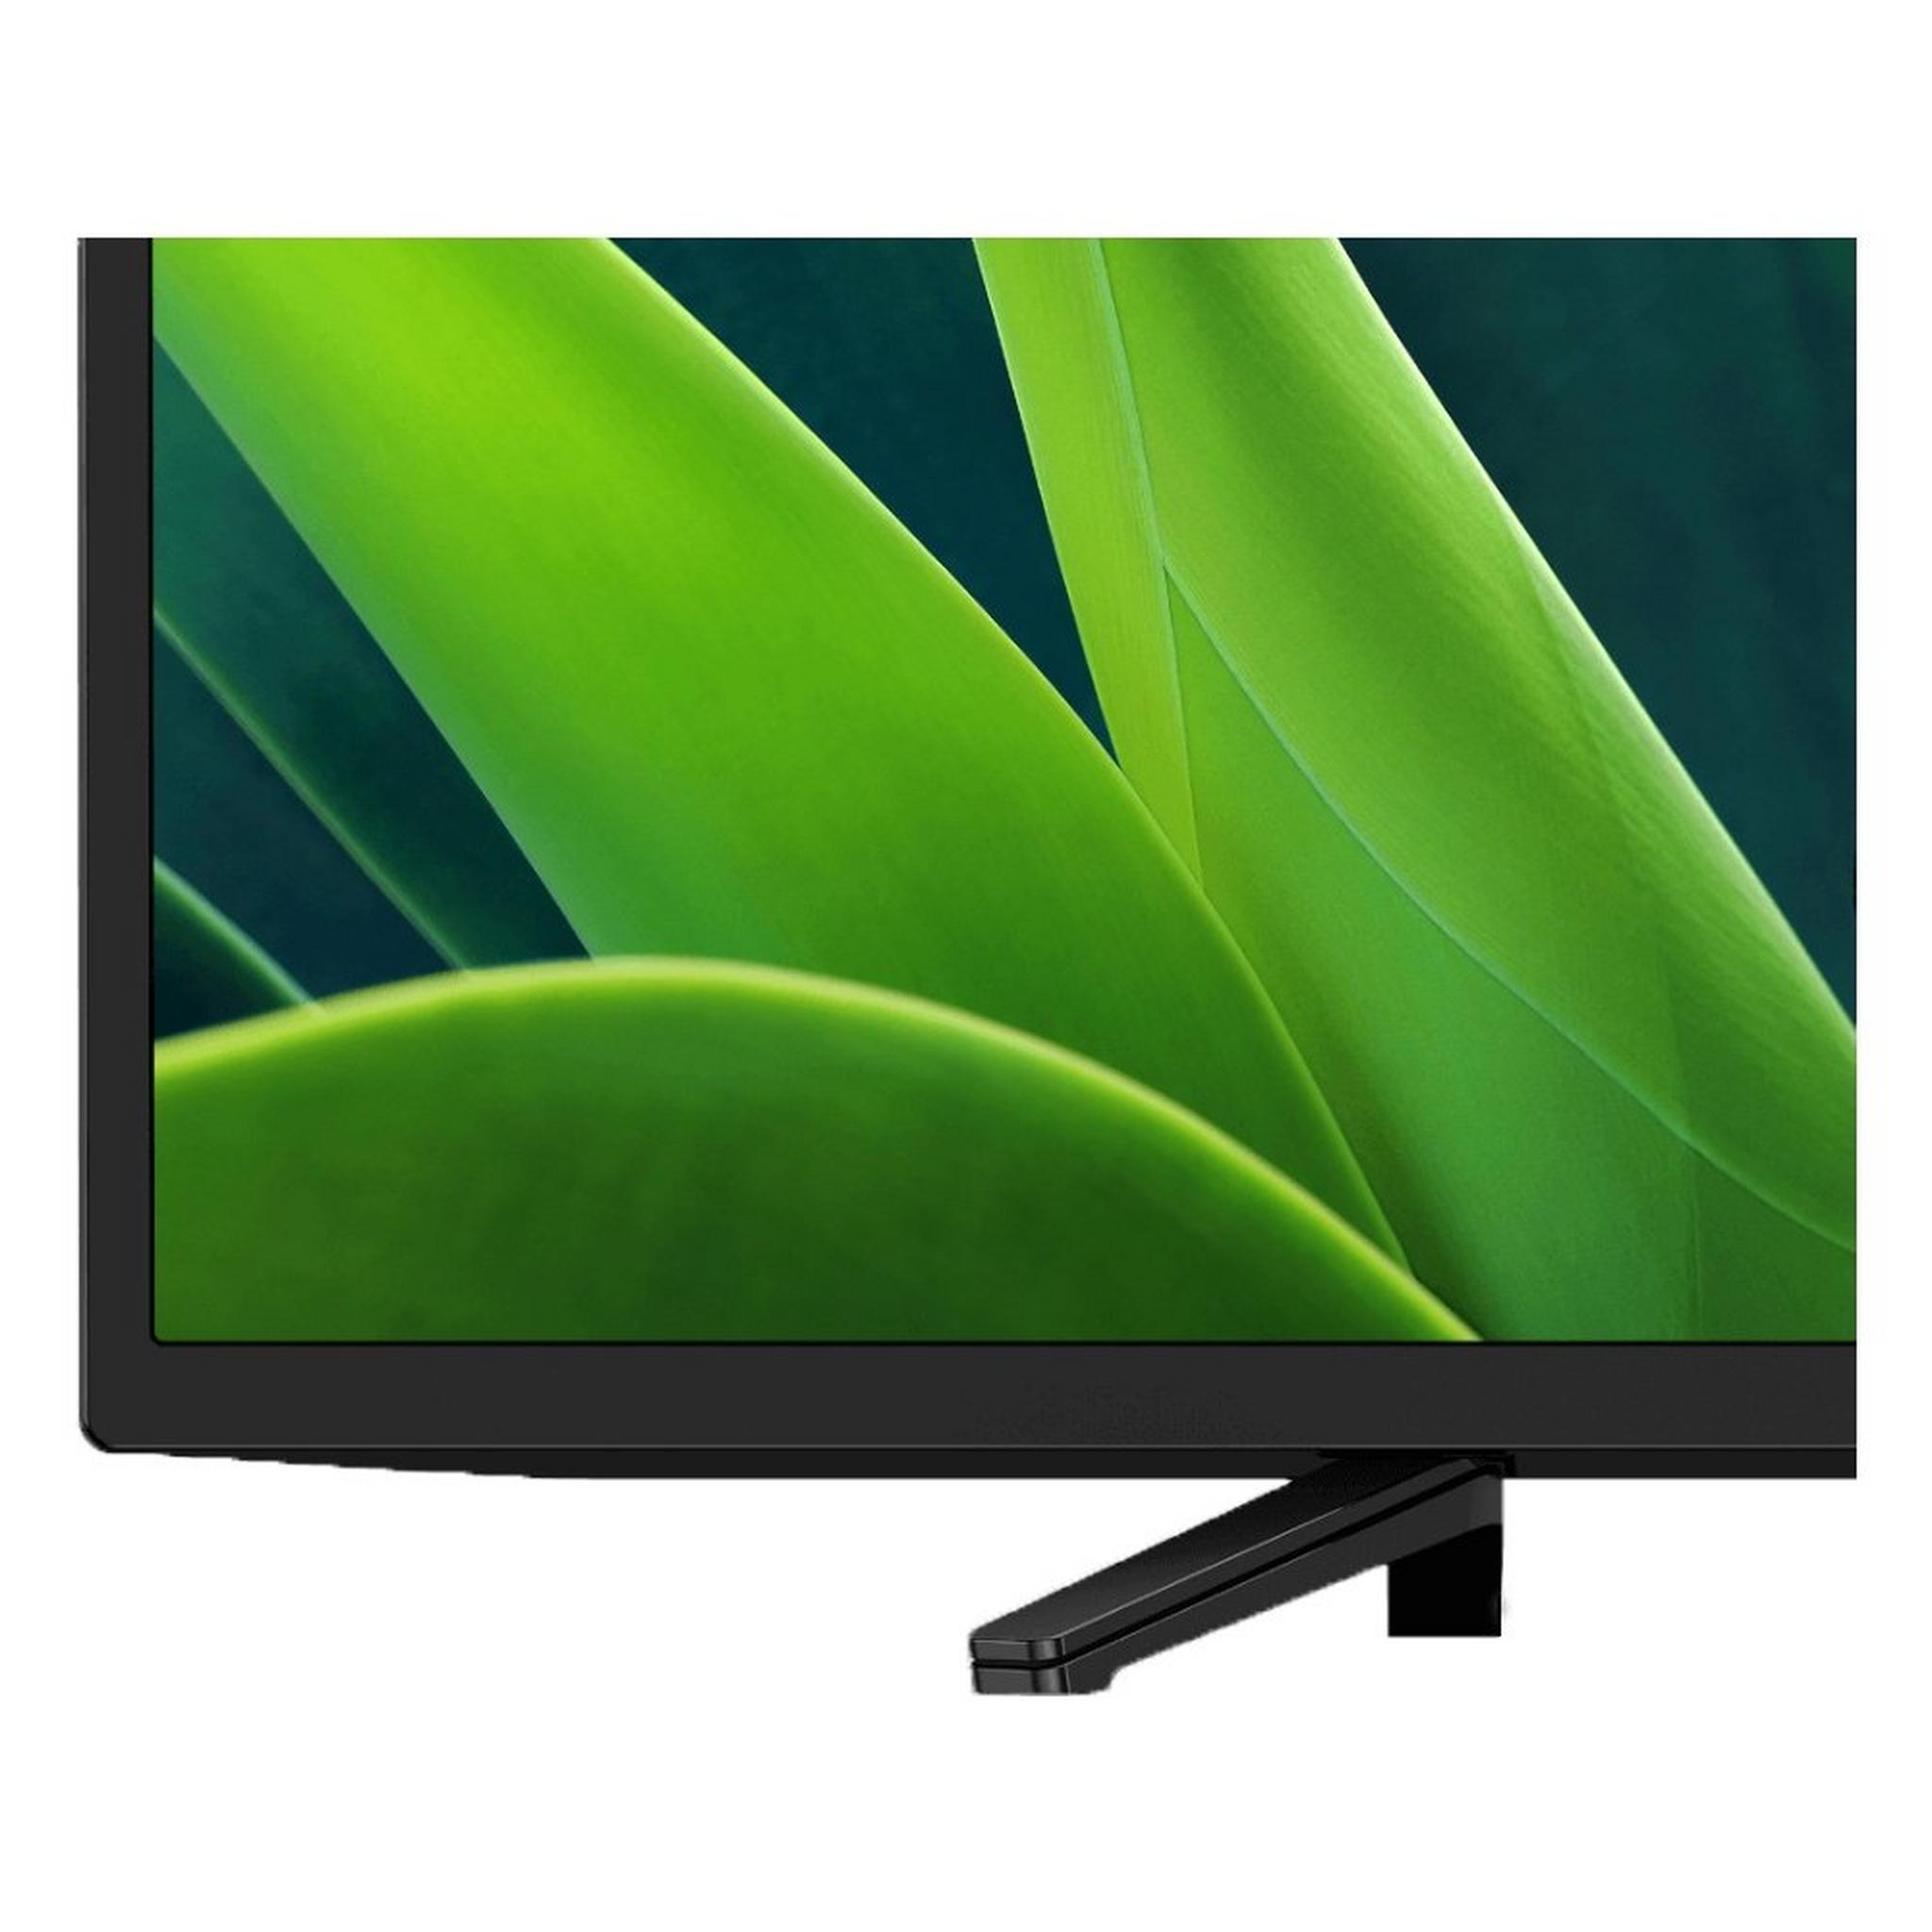 Sony Smart TV 32 inch Android LED 720p HDR (KD-32W830K)